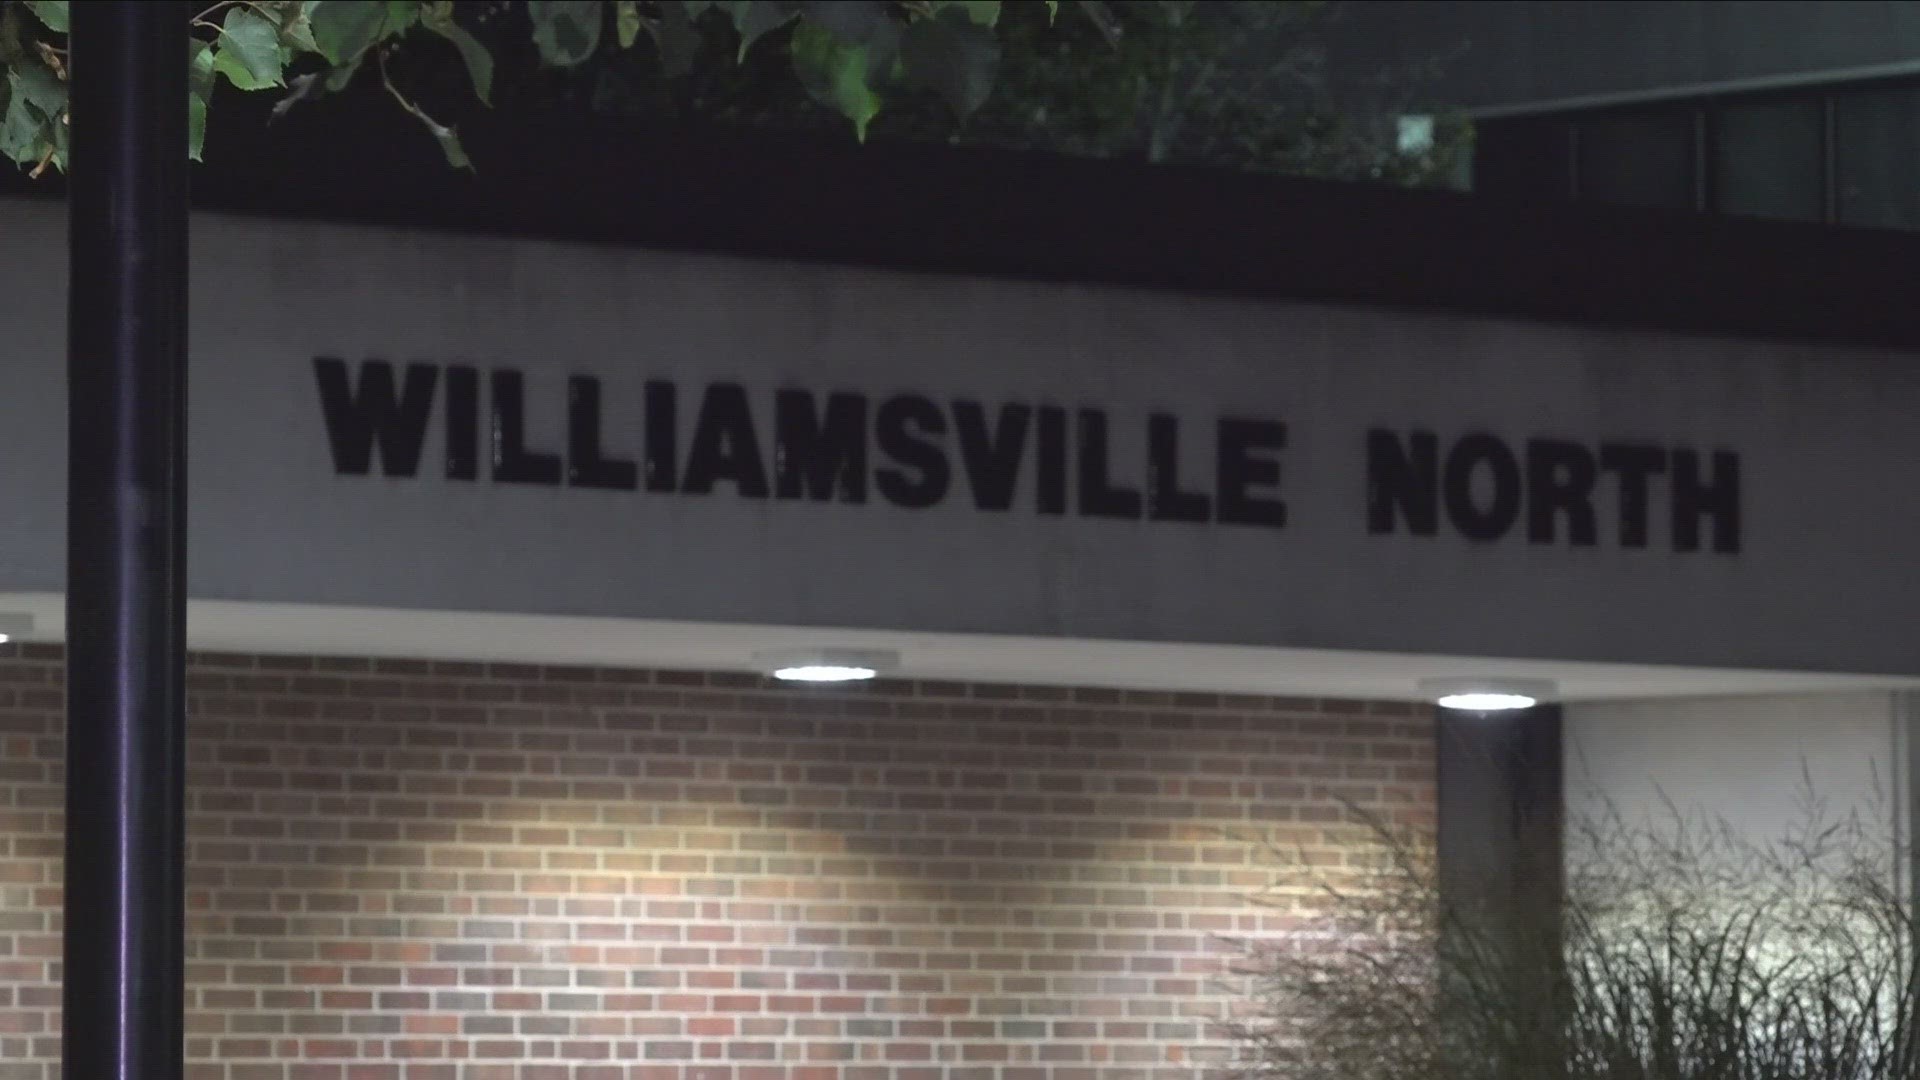 2 On Your Side has obtained this letter sent to parents in Williamsville Central School District about the video that was circulating among students.